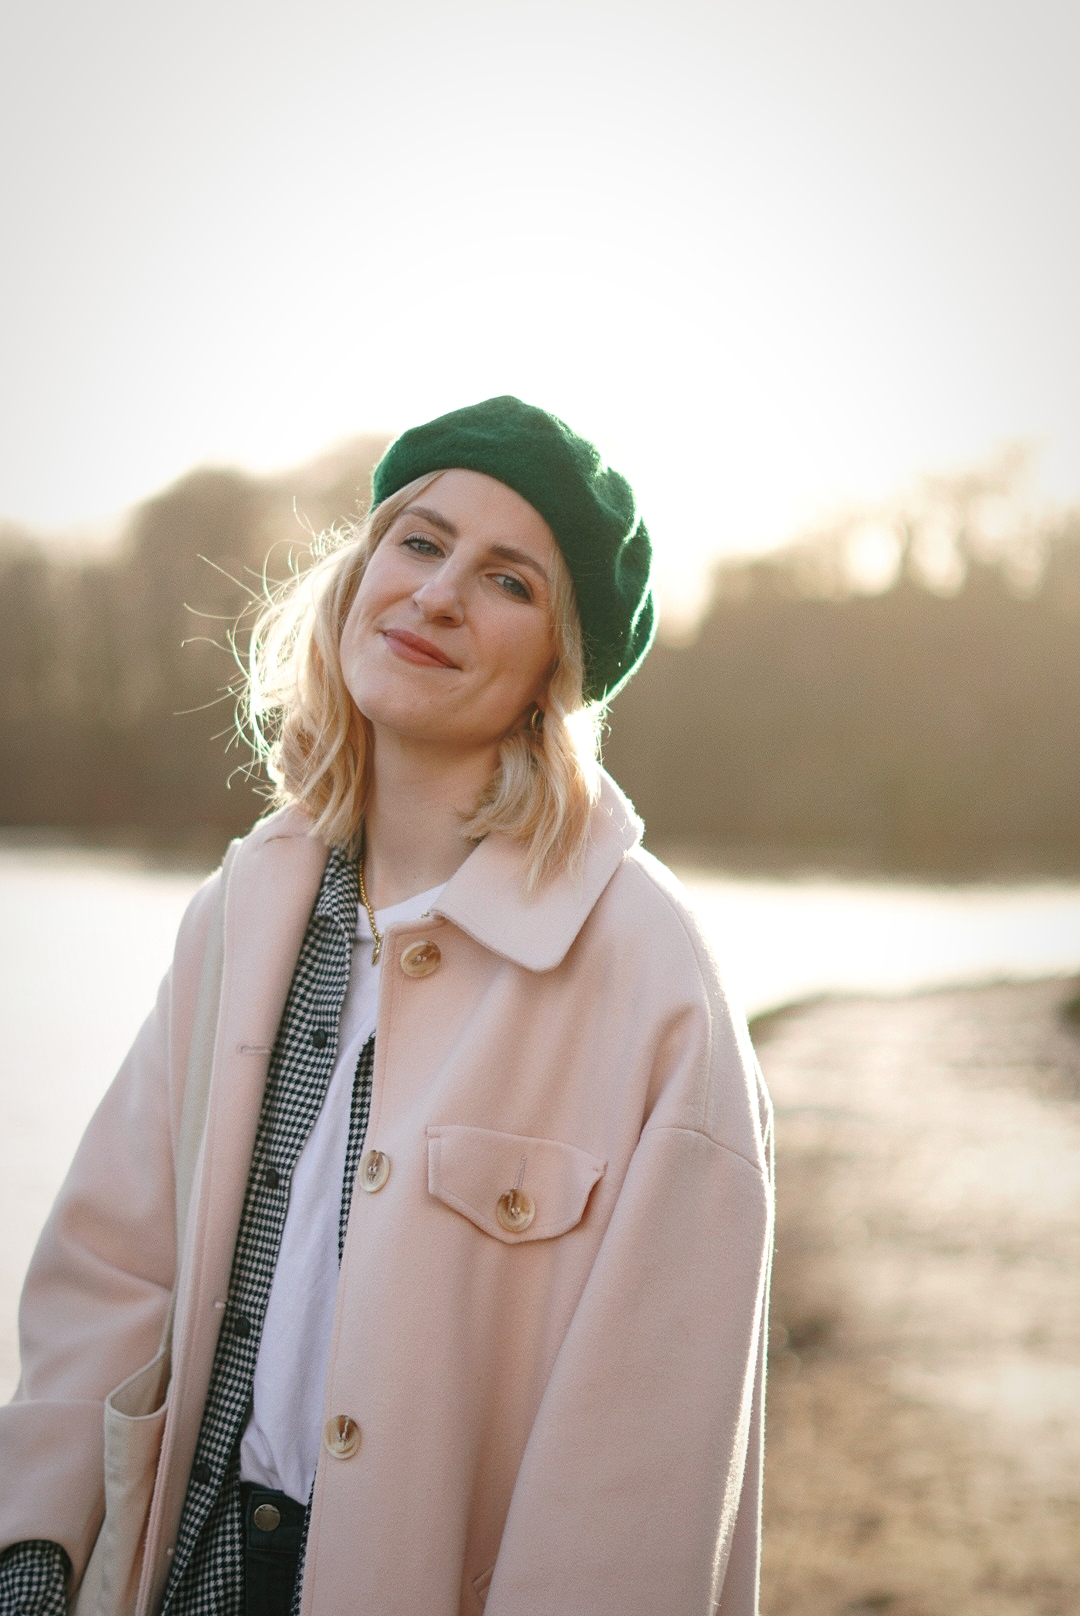 Amy is smiling at the camera, wearing a green beret and a light pink coat. She is stood in front of a lake, the sun casting a warm glow over the photo.